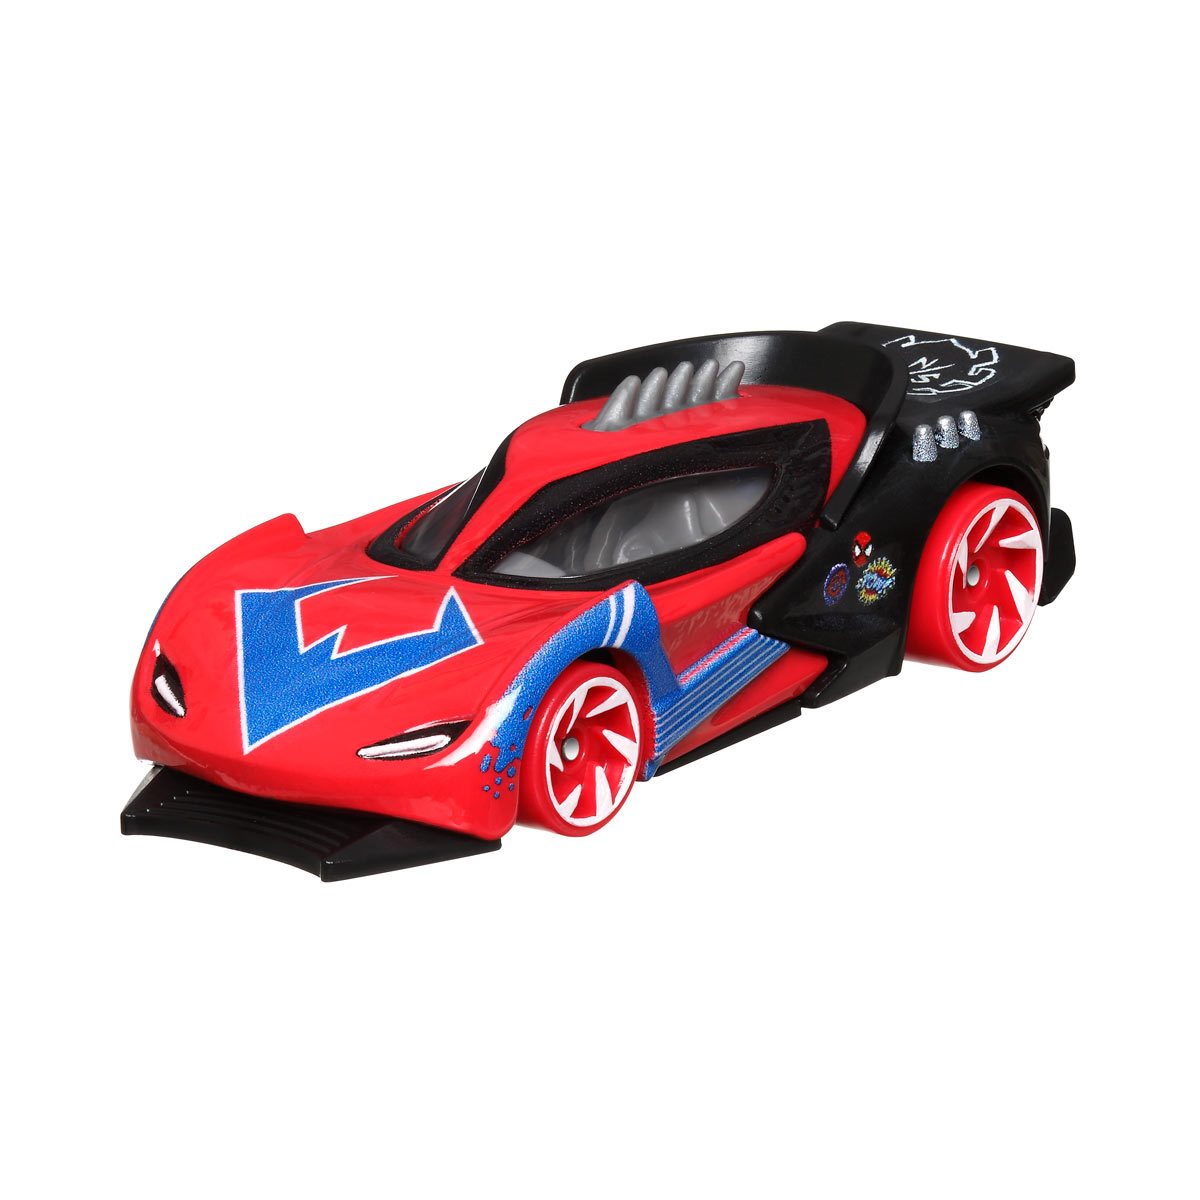 Marvel Hot Wheels Character Car 2023 Mix 5 – Hot Match Collectables